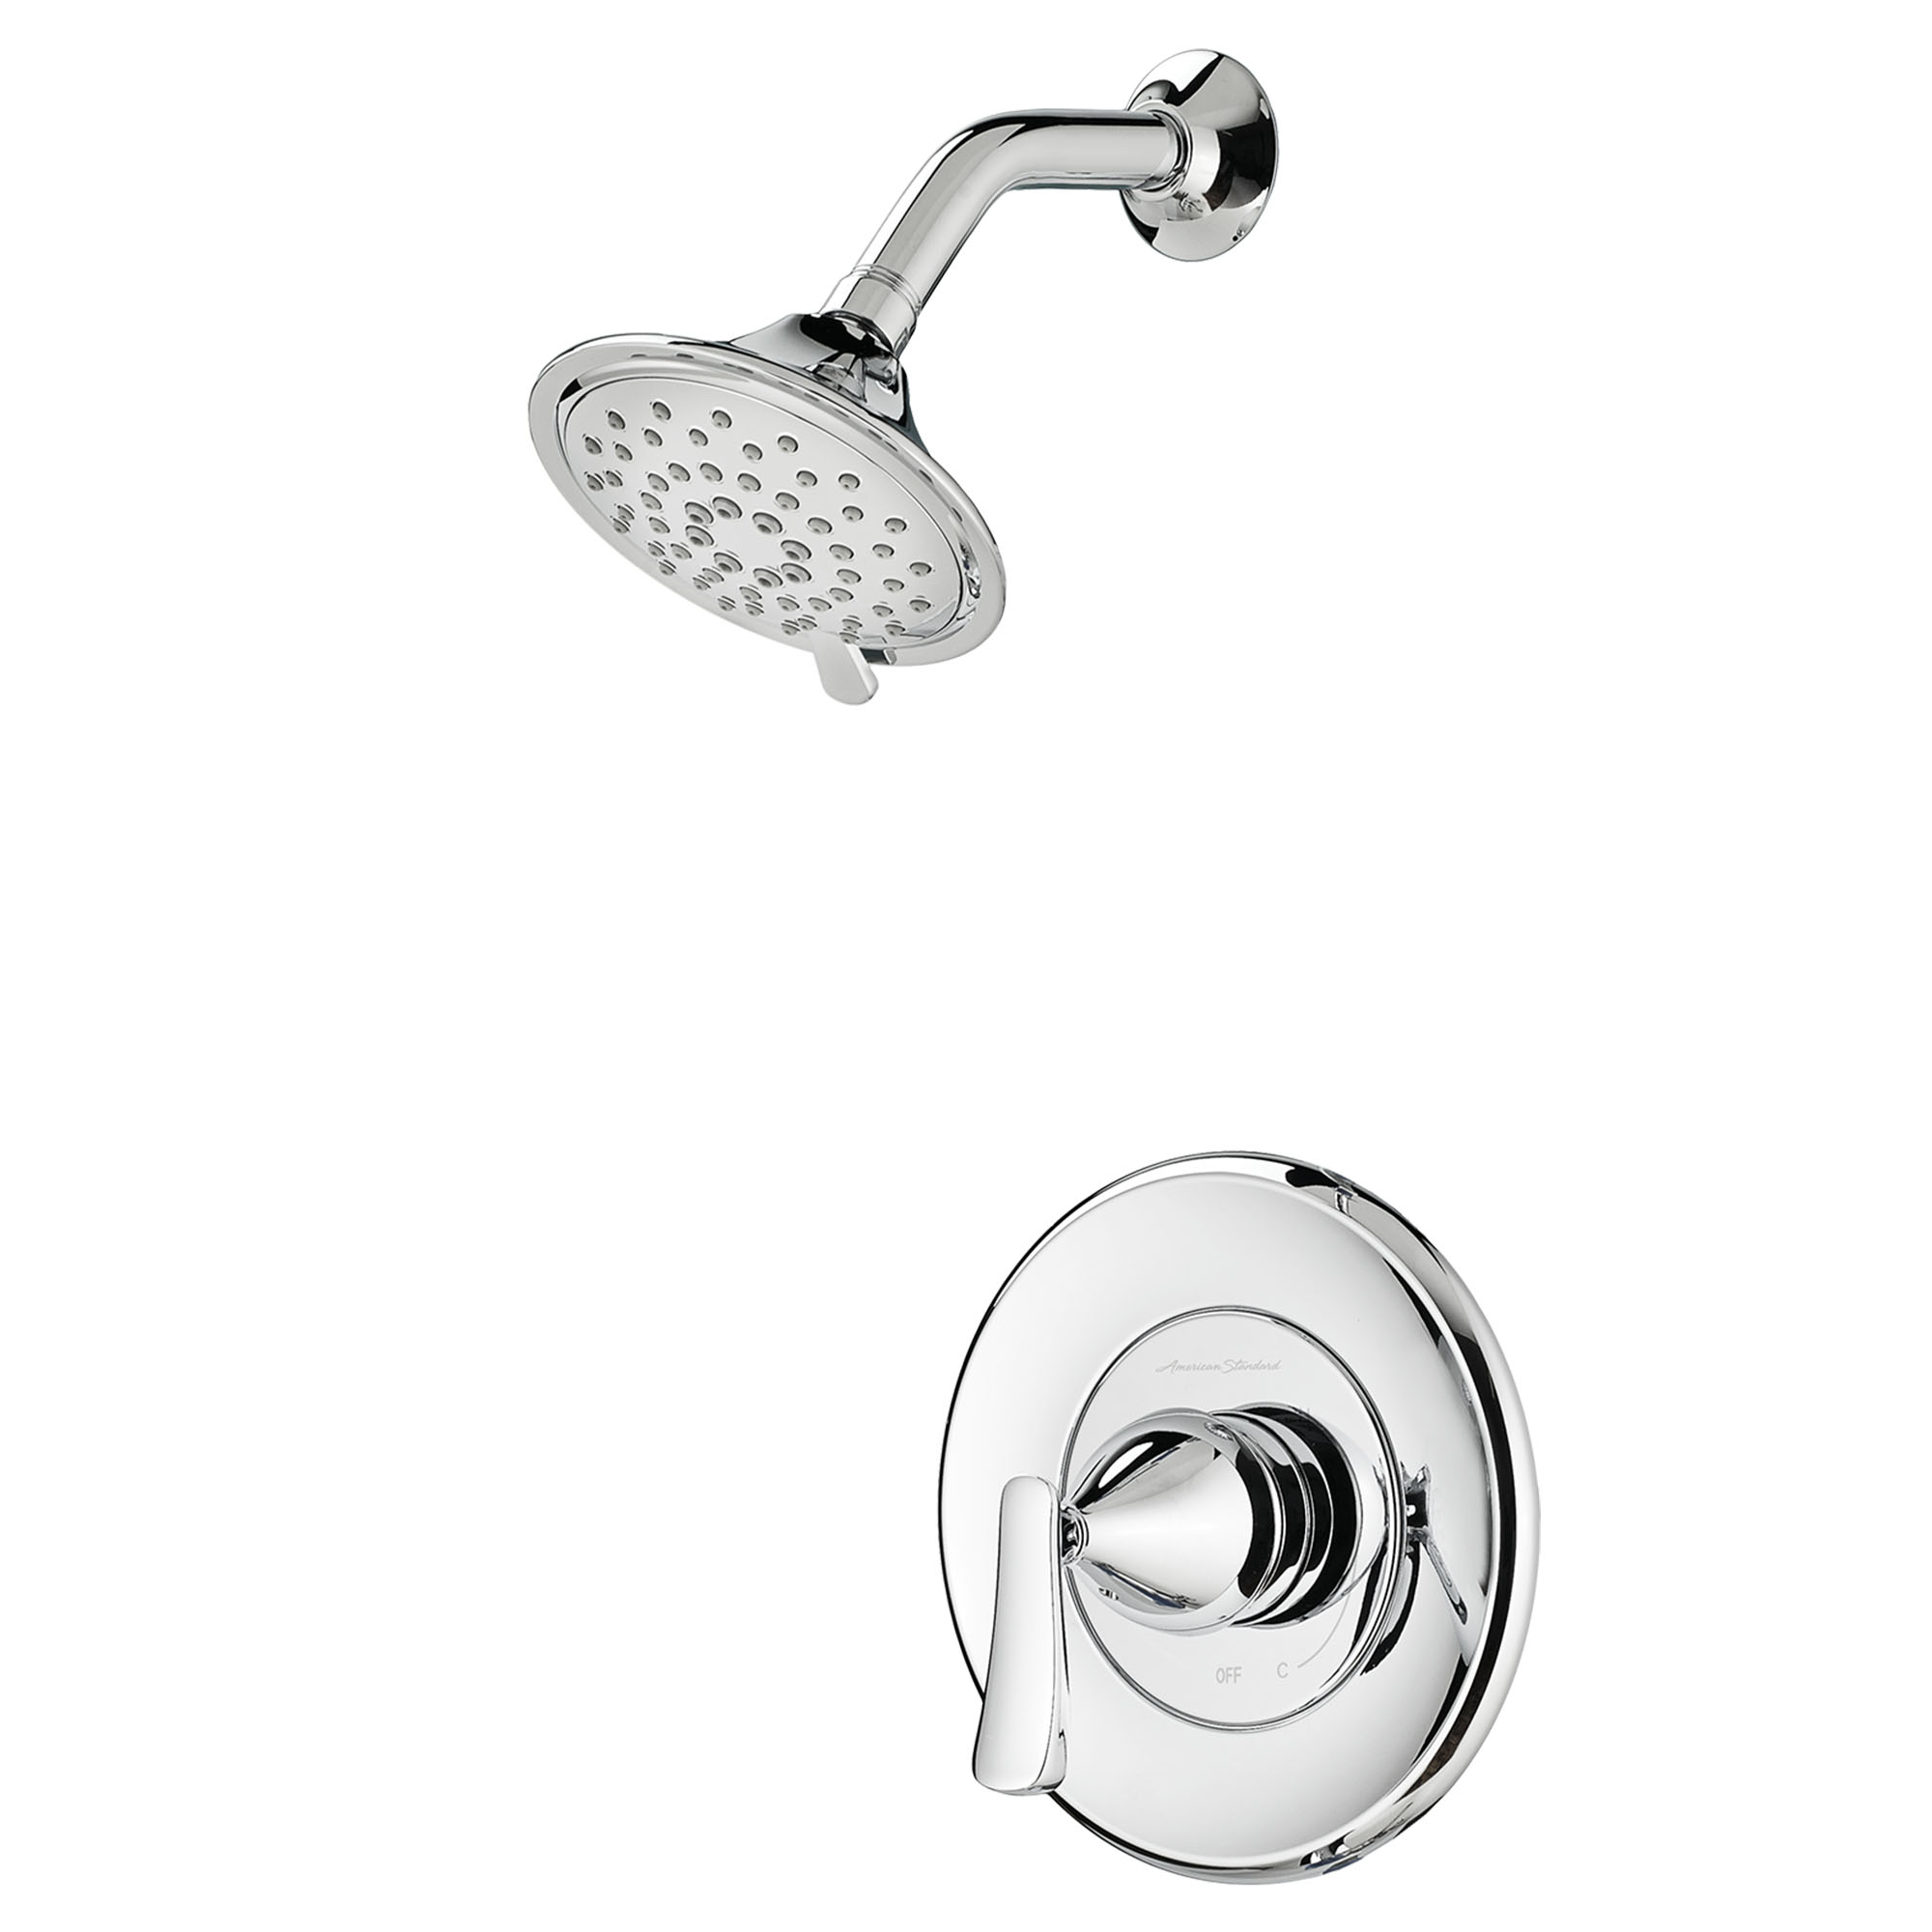 Chatfield 1.8 GPM Shower Trim Kit with Ceramic Disc Valve Cartridge and Lever Handle